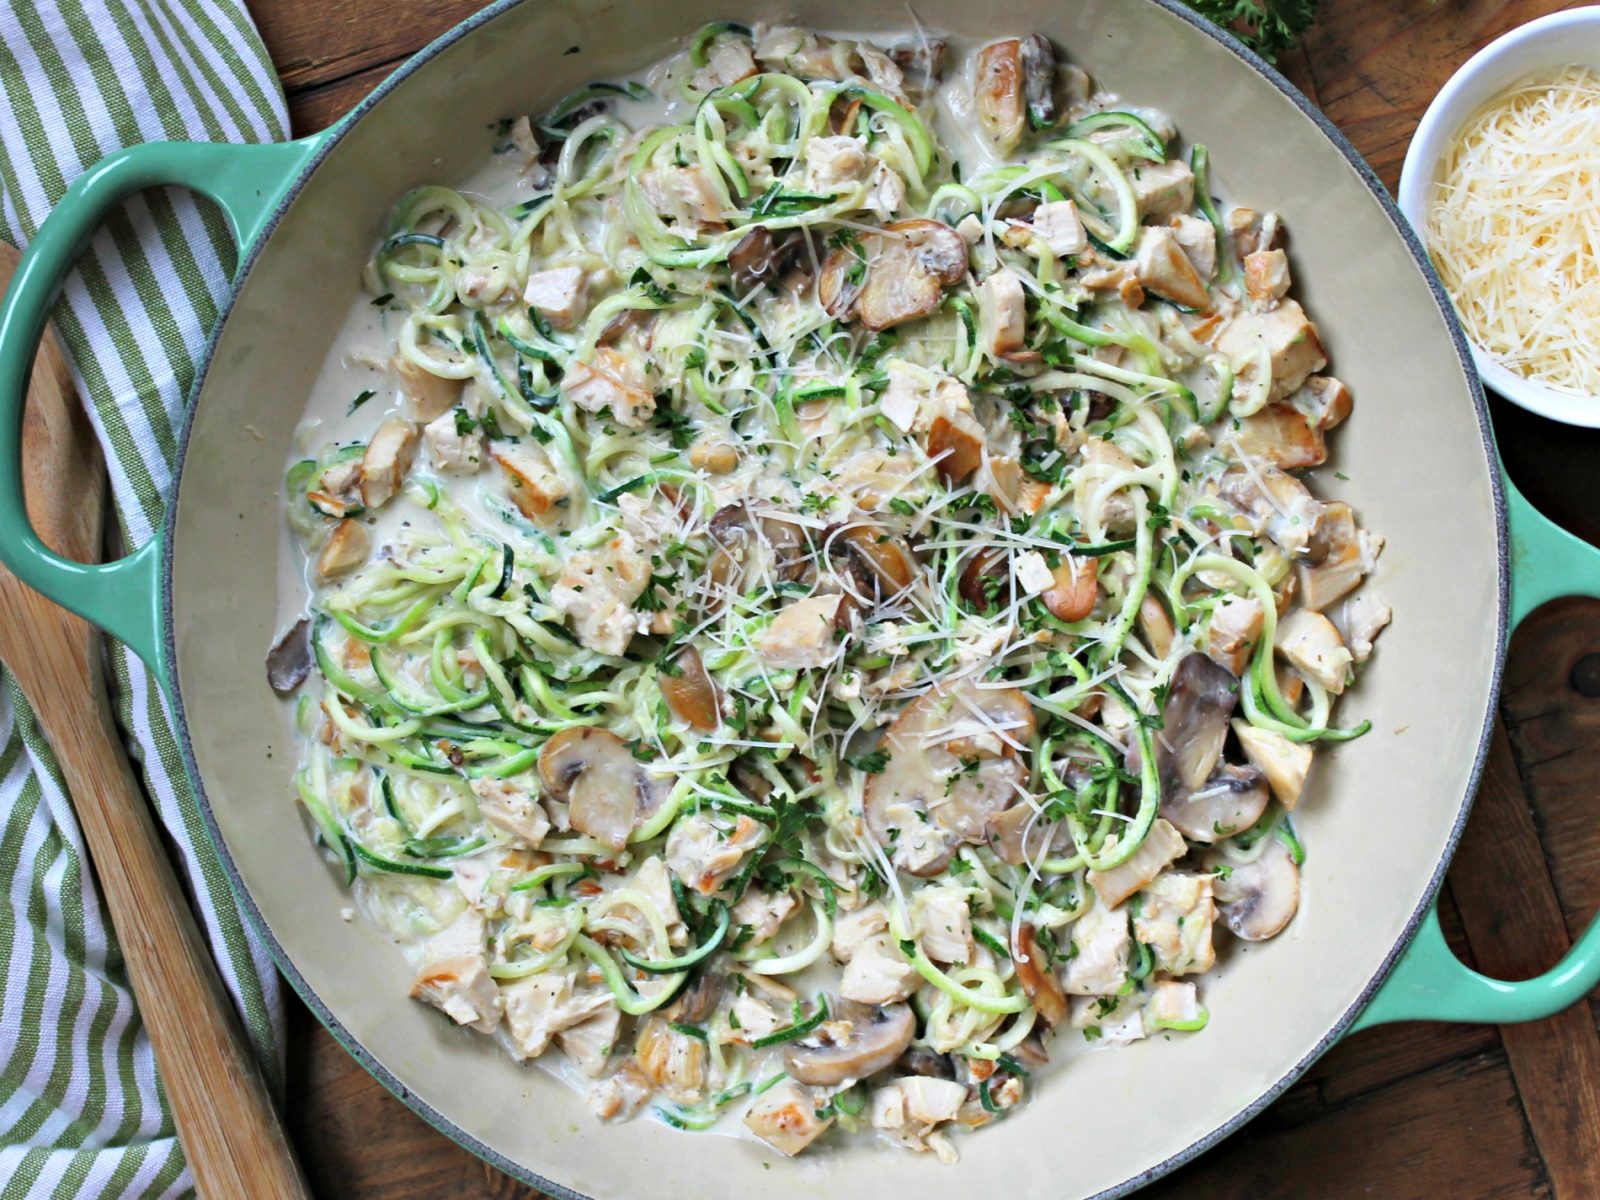 Creamy Mushroom Pork & Zoodles – Get Everything You Need At Publix (+ Look For An Arla Sampling This Weekend)